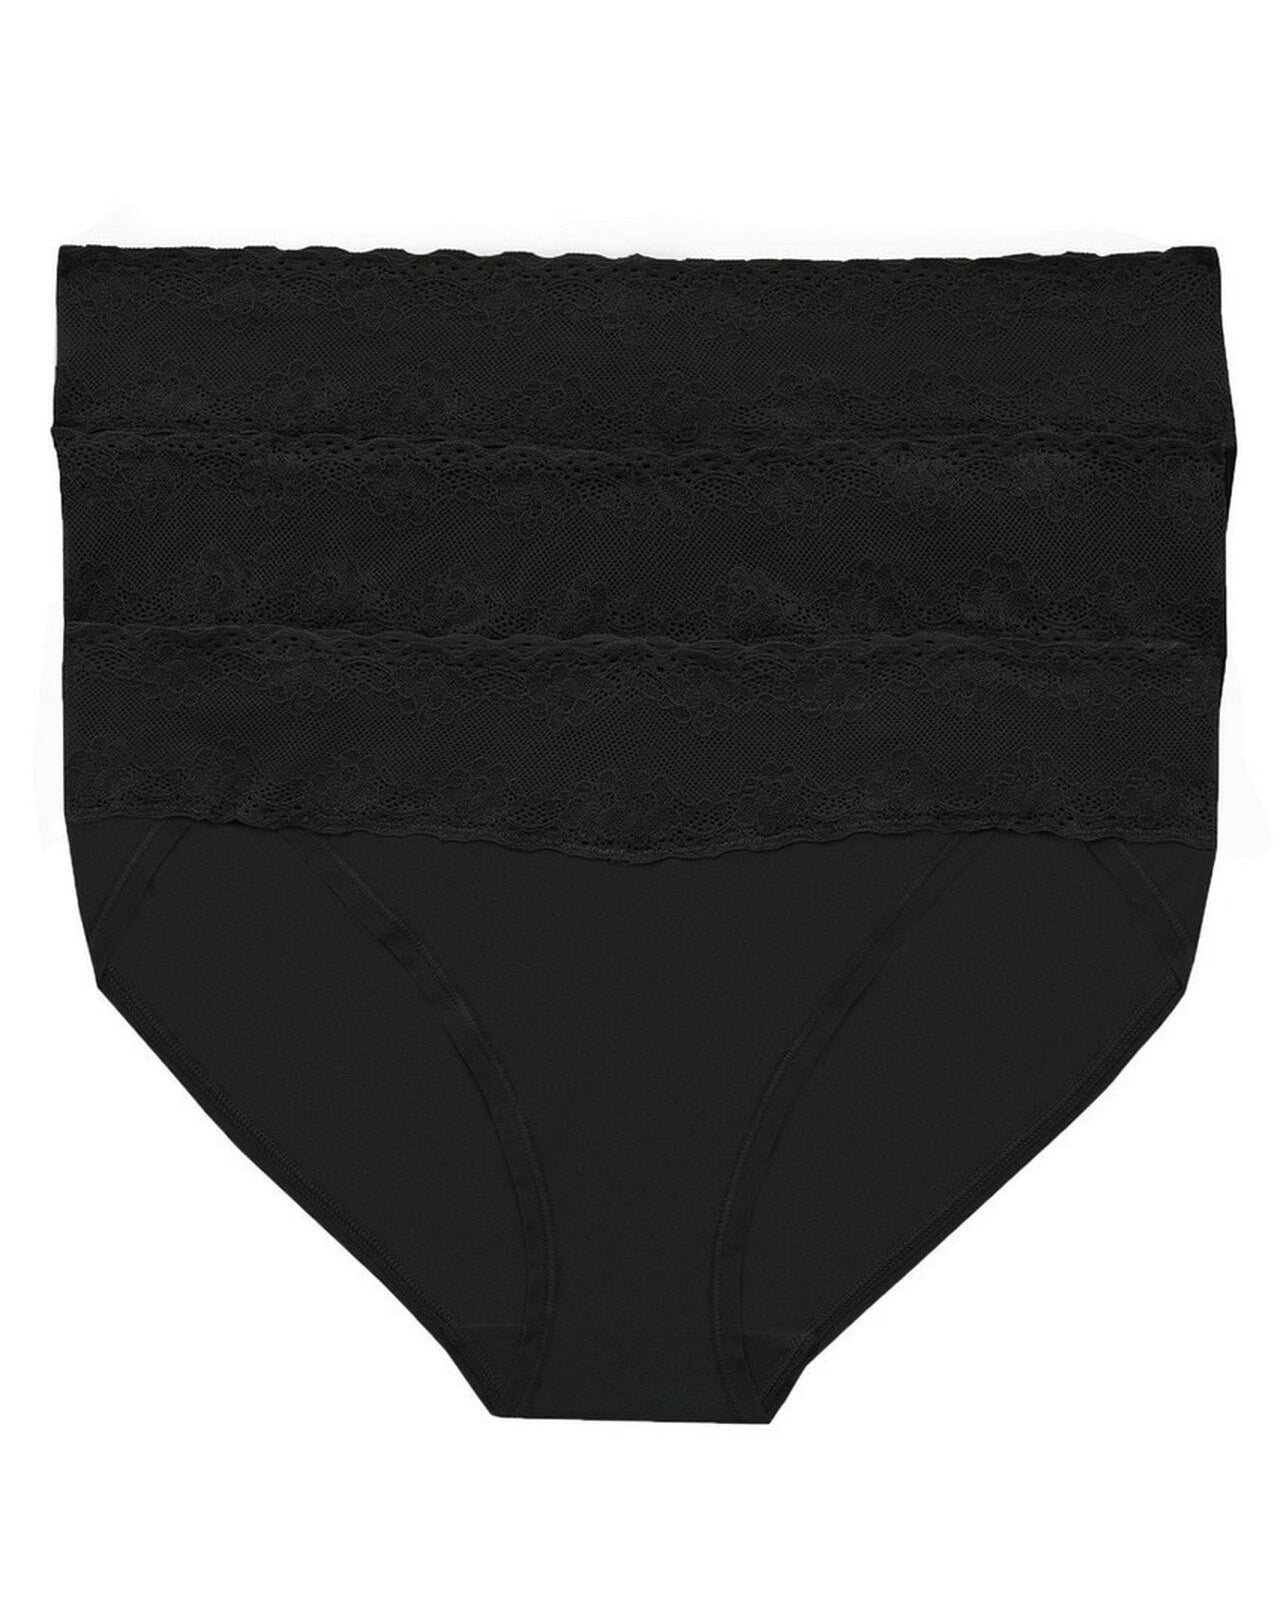 Natori Bliss Perfection One-Size V-Kini 3 Pack - Black - An Intimate Affaire